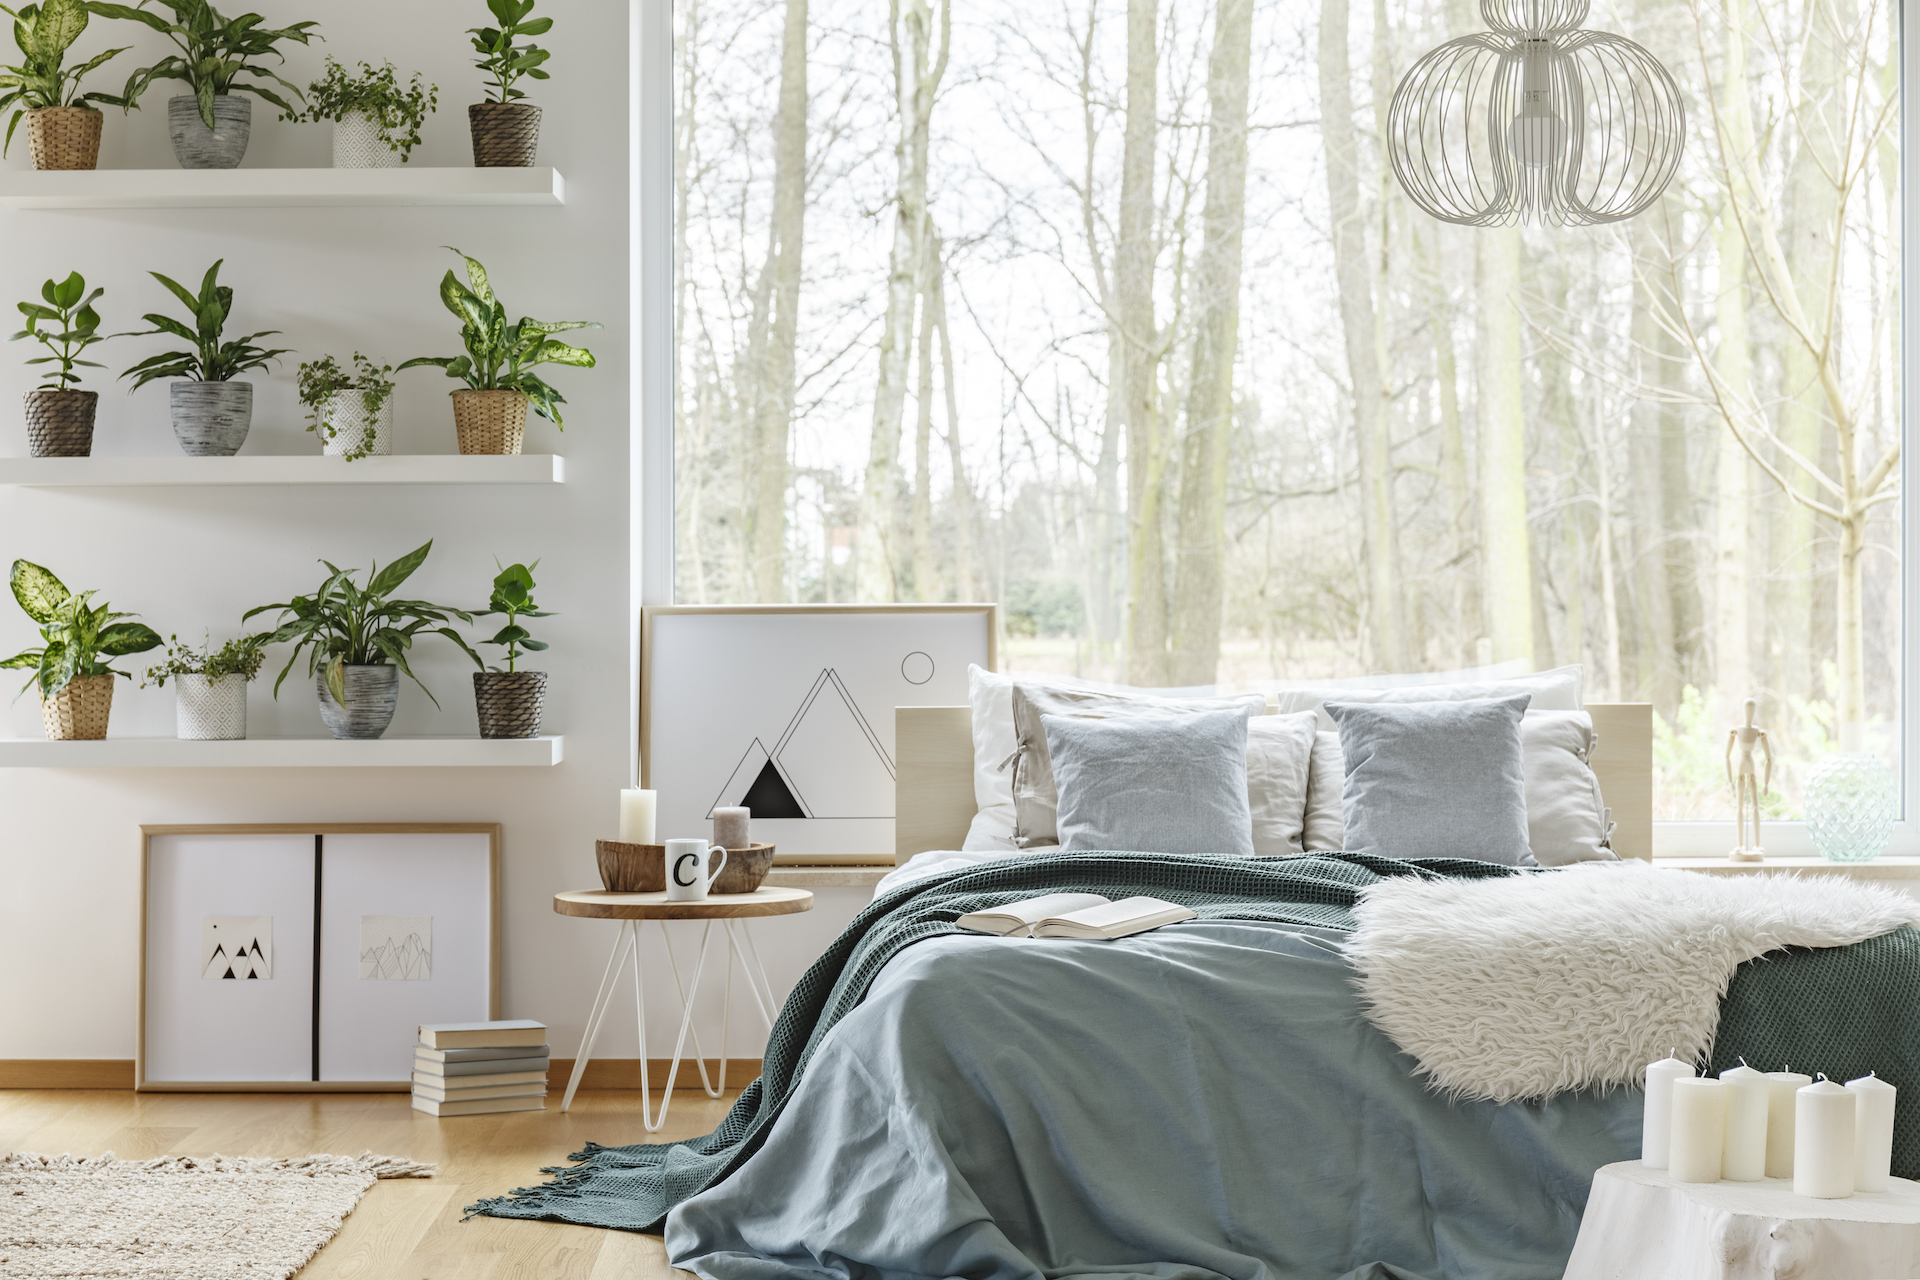 King-size bed and plants on shelves in cozy bedroom interior with a large window